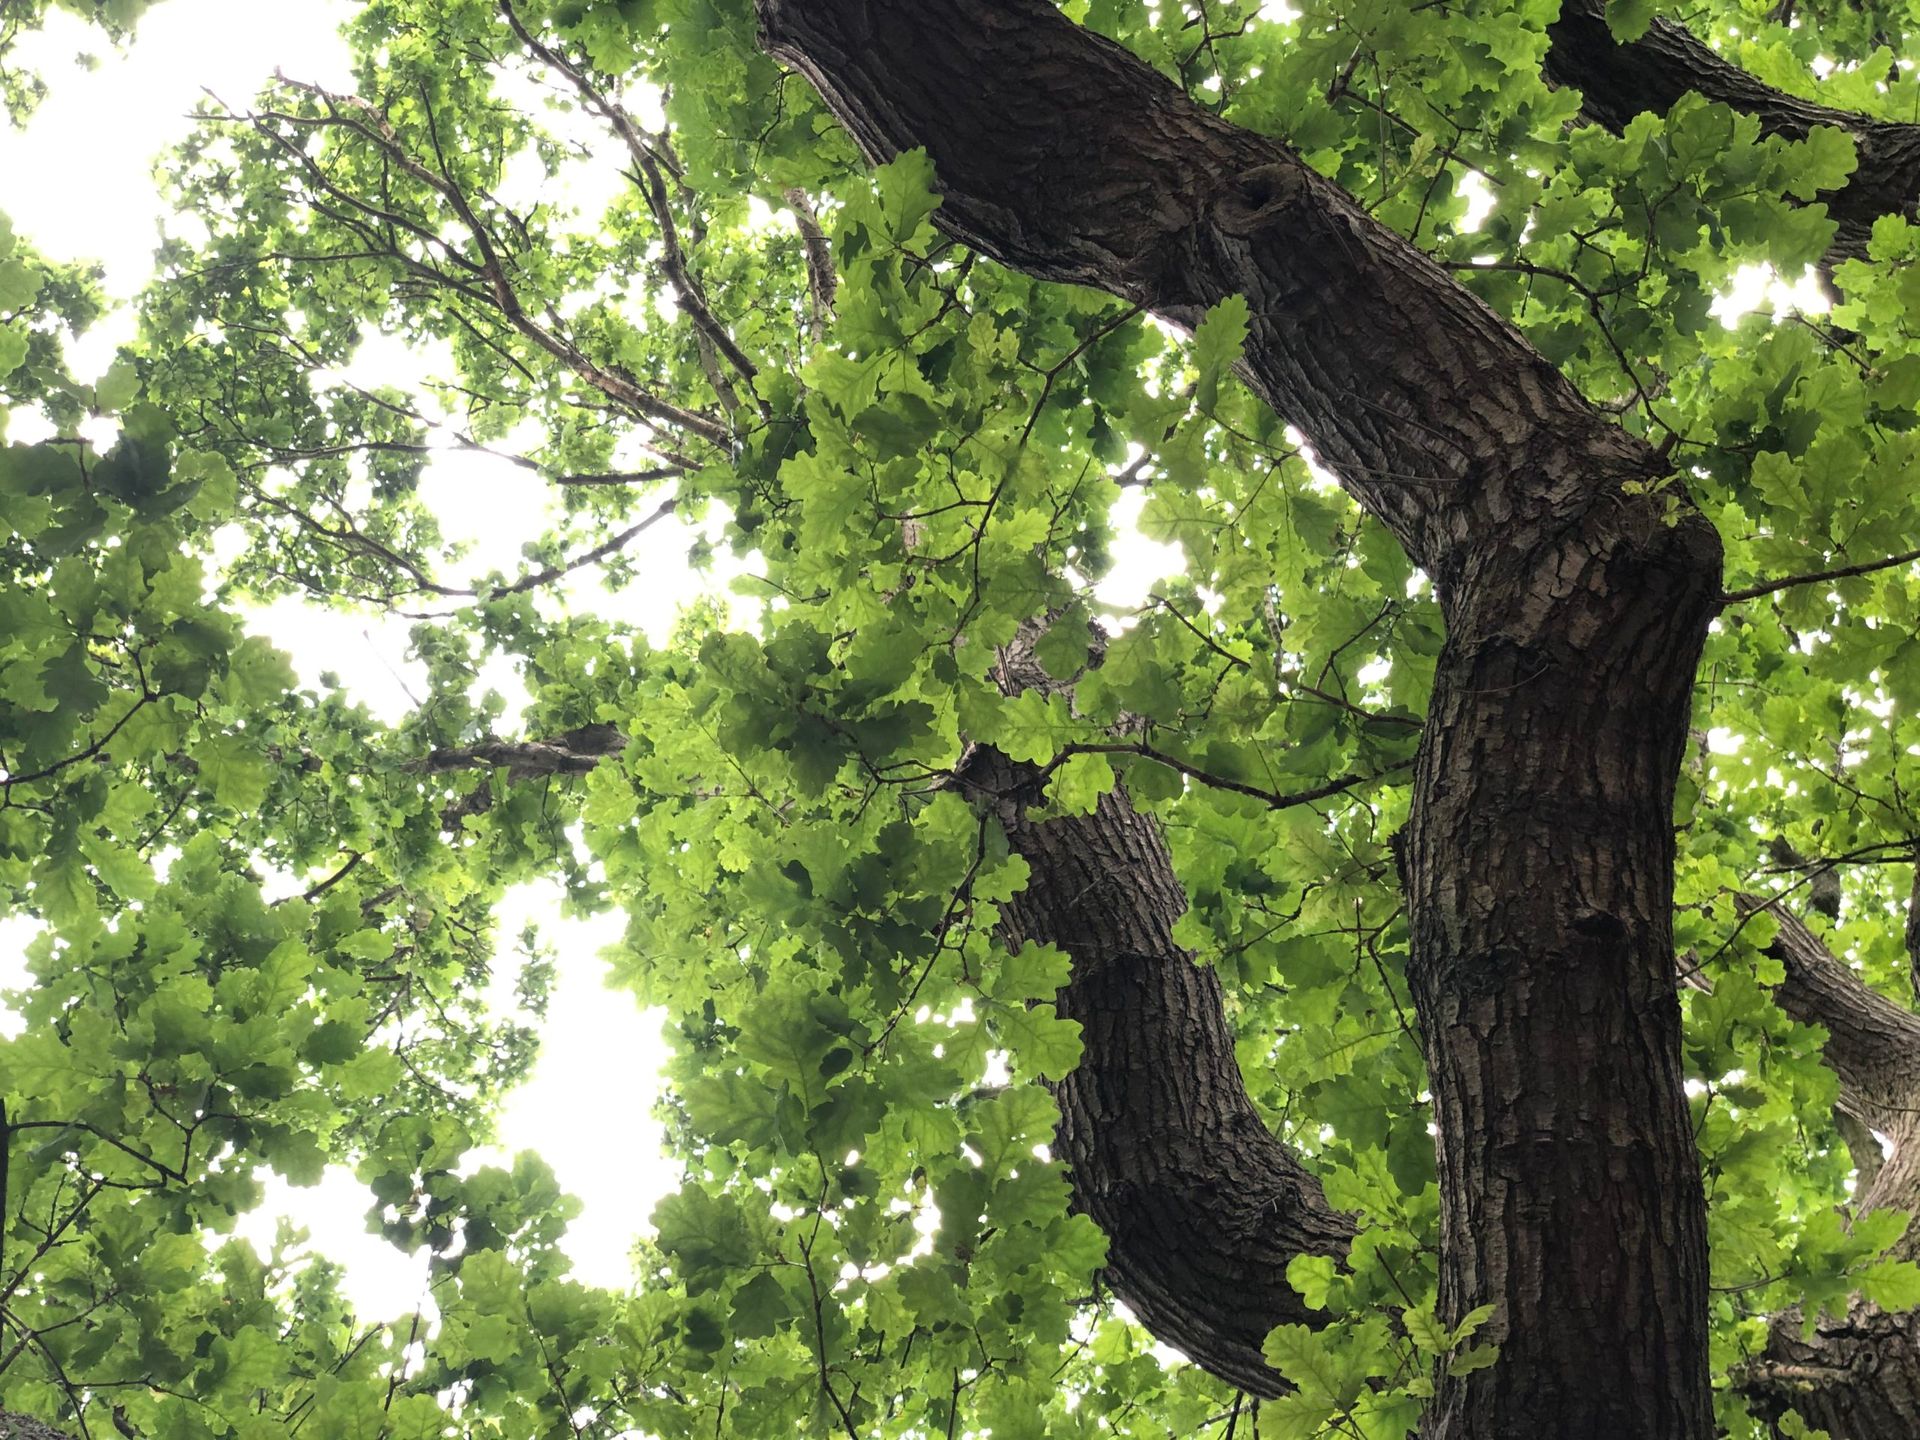 A view of leaves and branches of an oak tree from looking up.